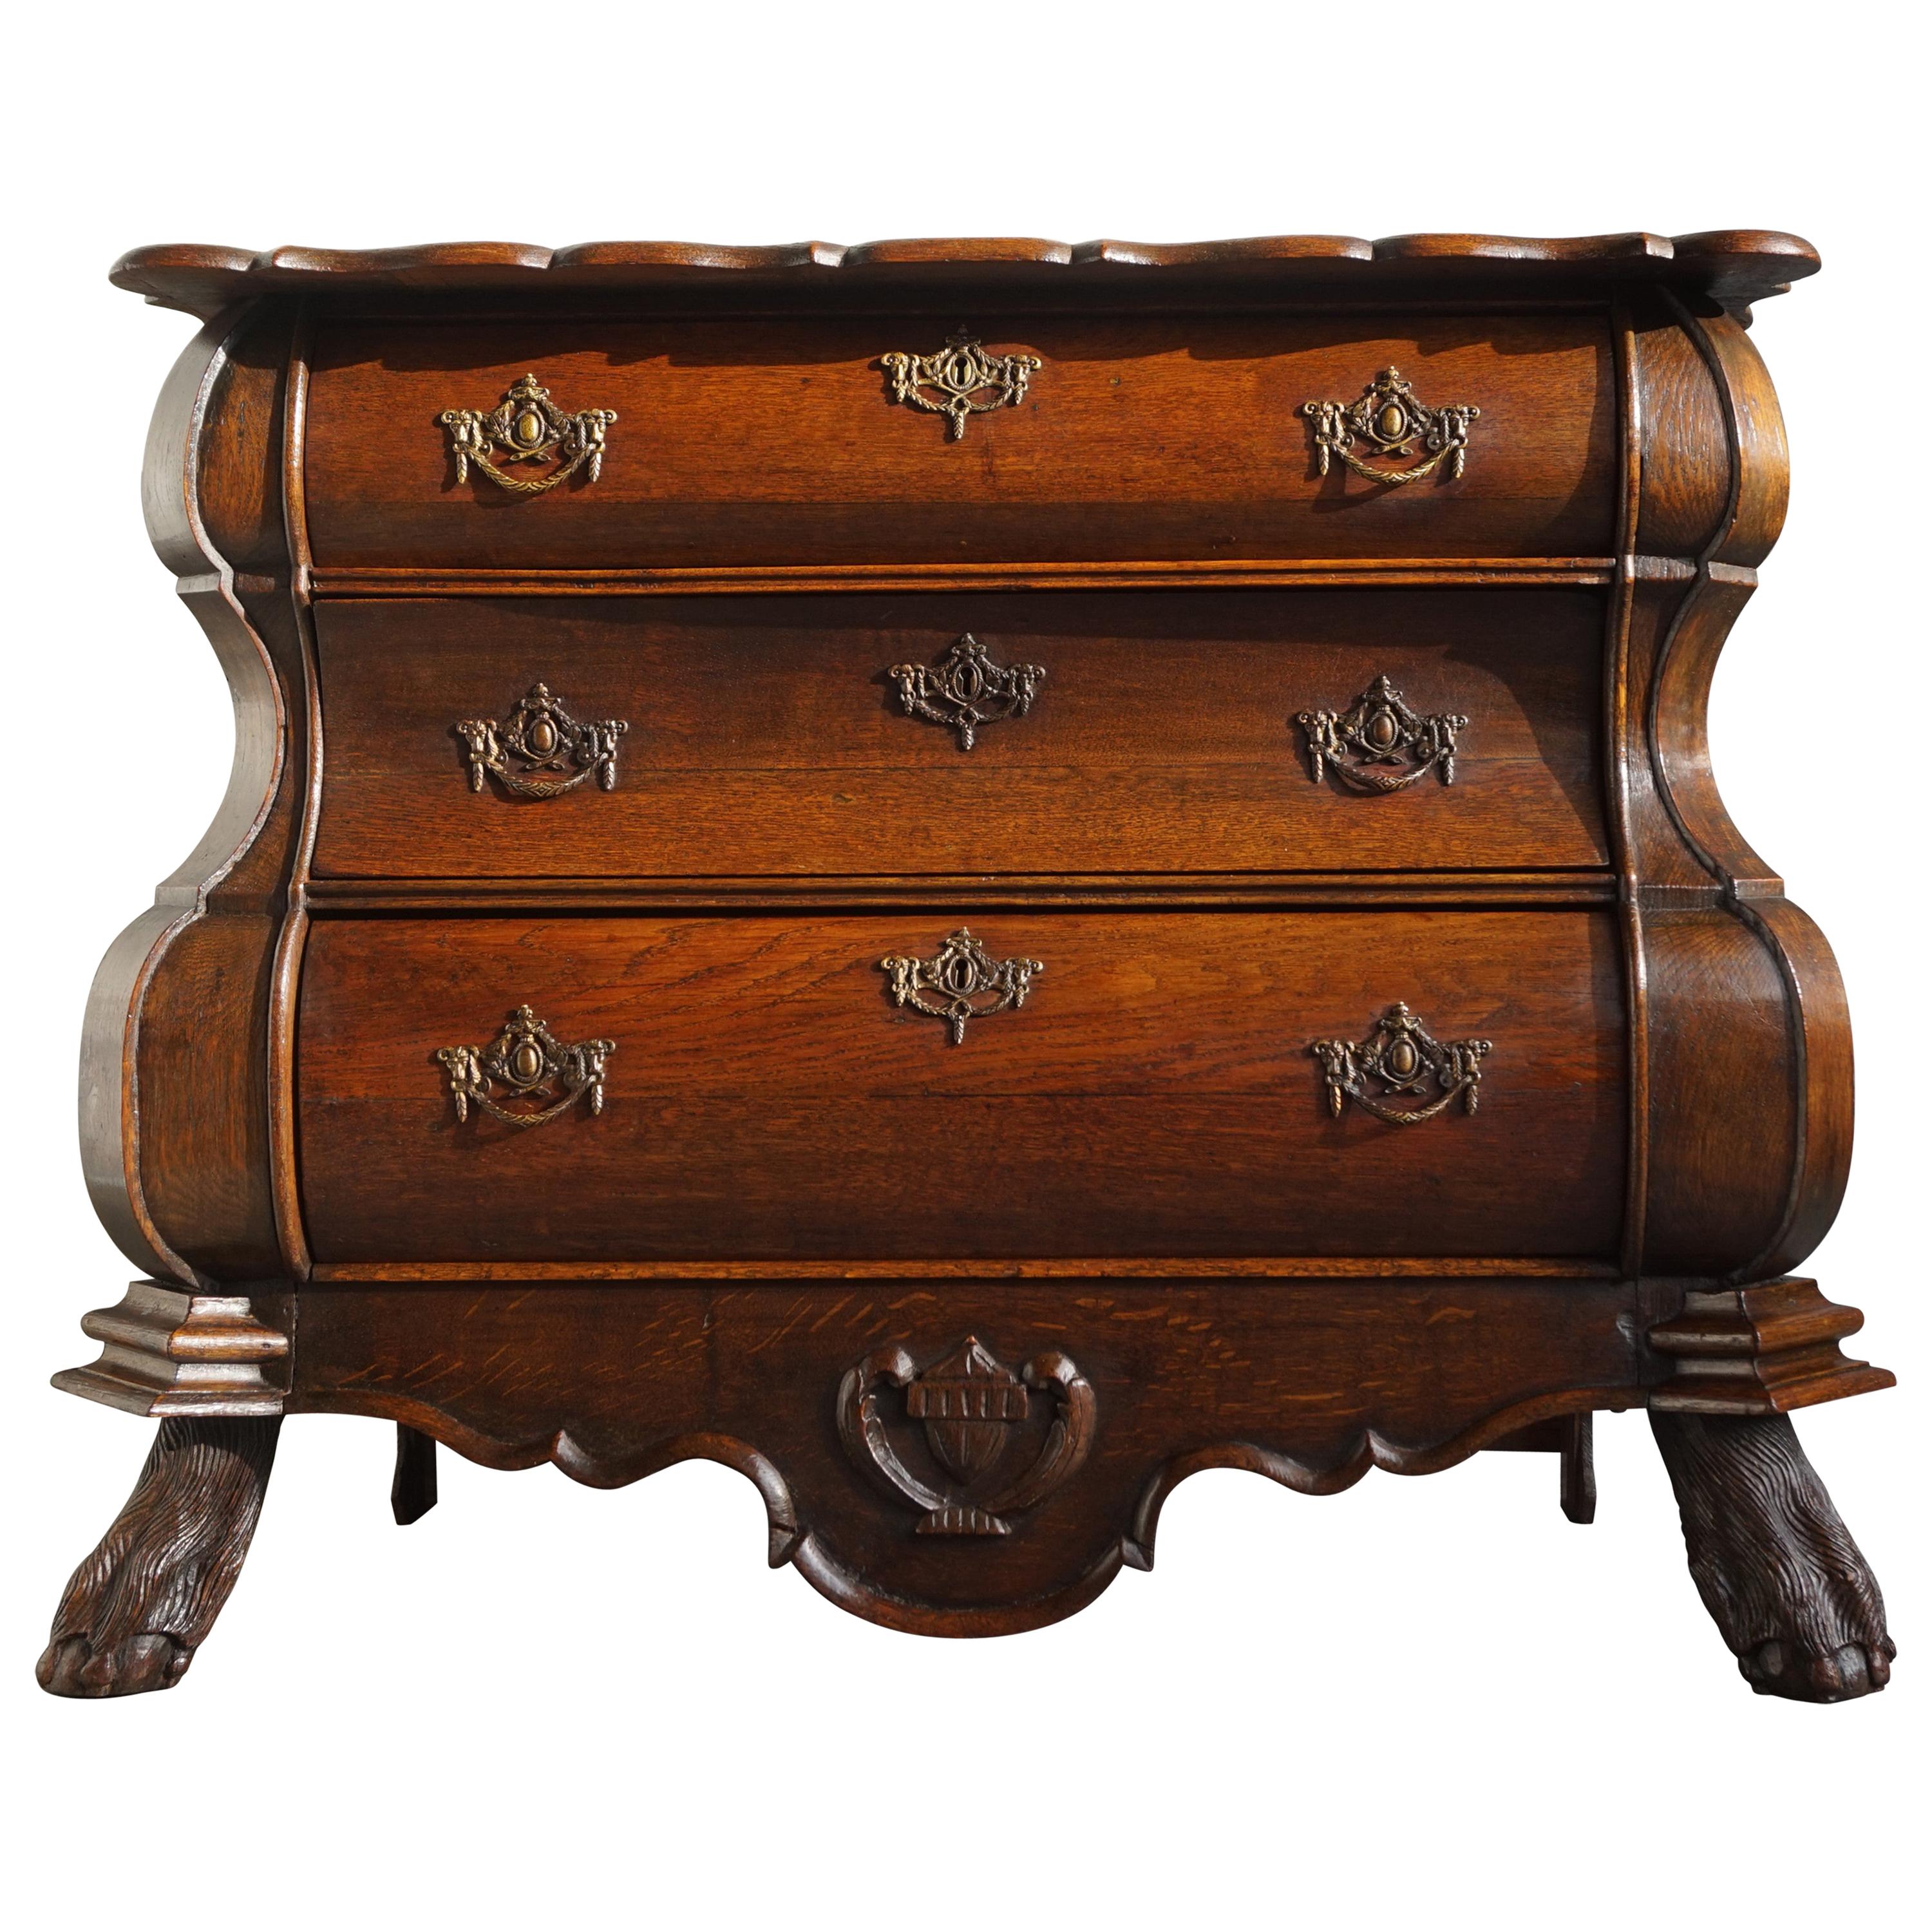 Antique 18th Century Dutch Rococo Oak Bomb Chest of Drawers with Claw Feet For Sale